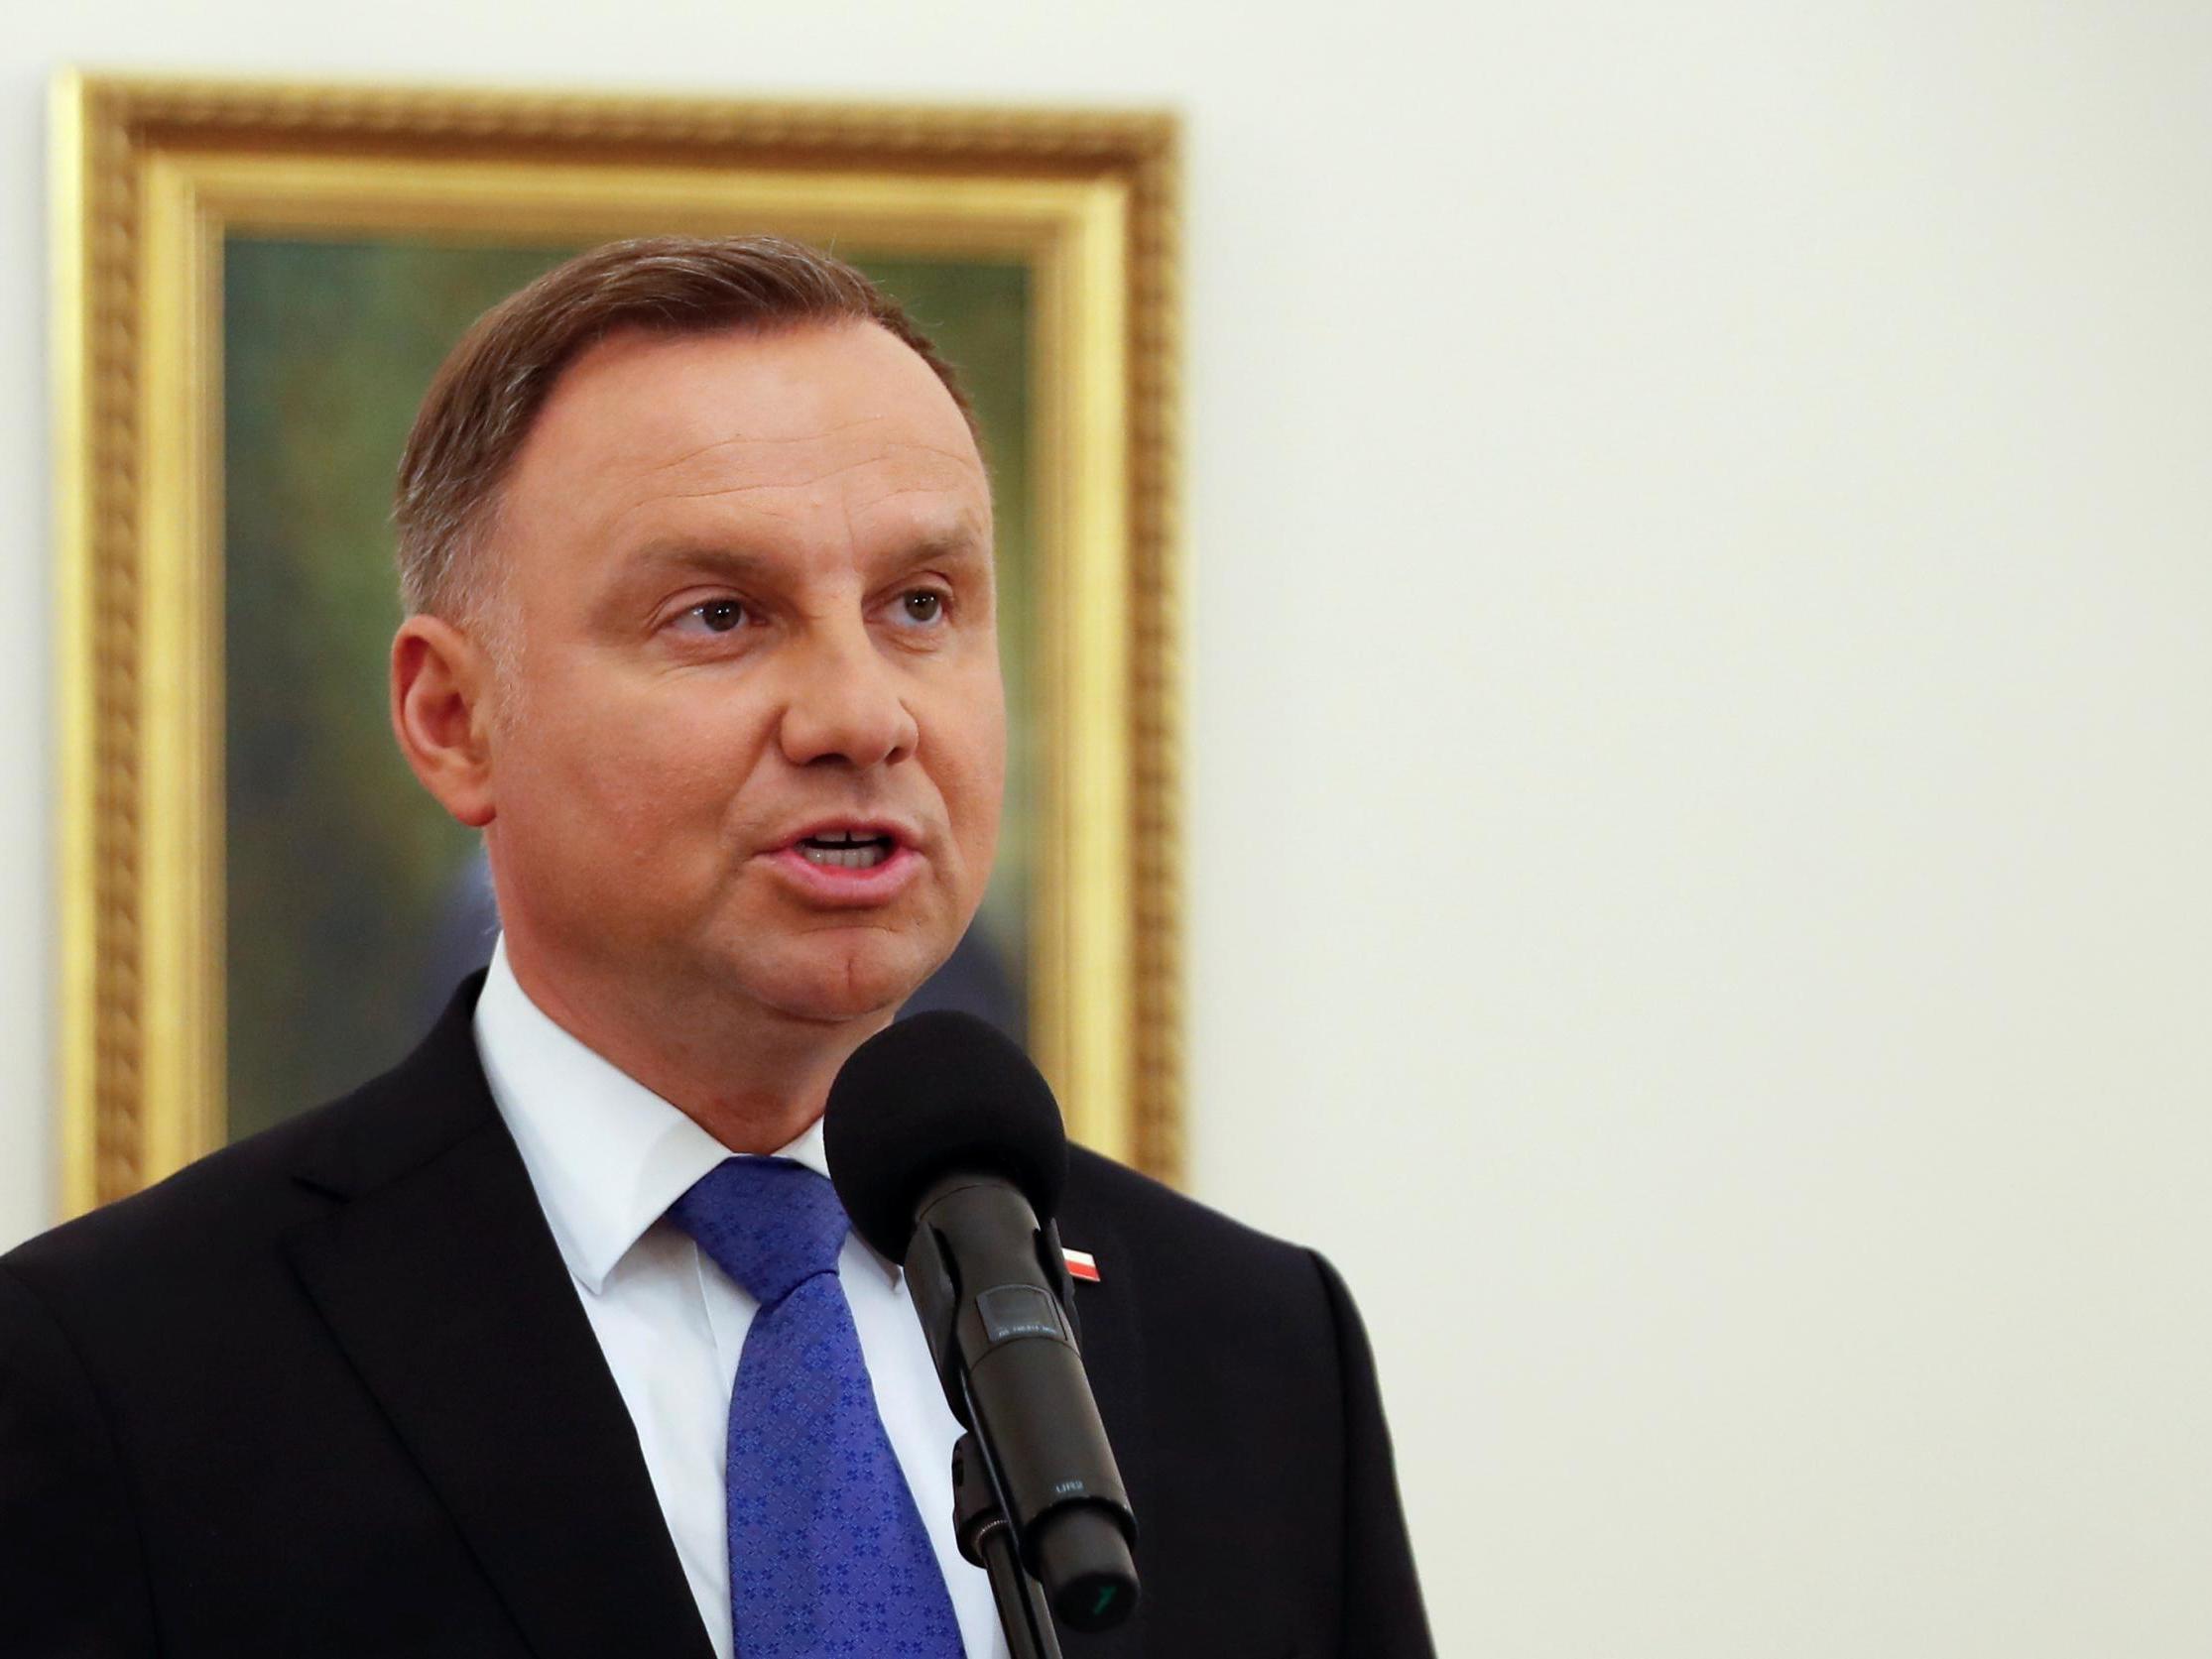 The incumbent president Andrzej Duda talks to the media in Warsaw, Poland, after the first exit polls were announced on 12 July, 2020.